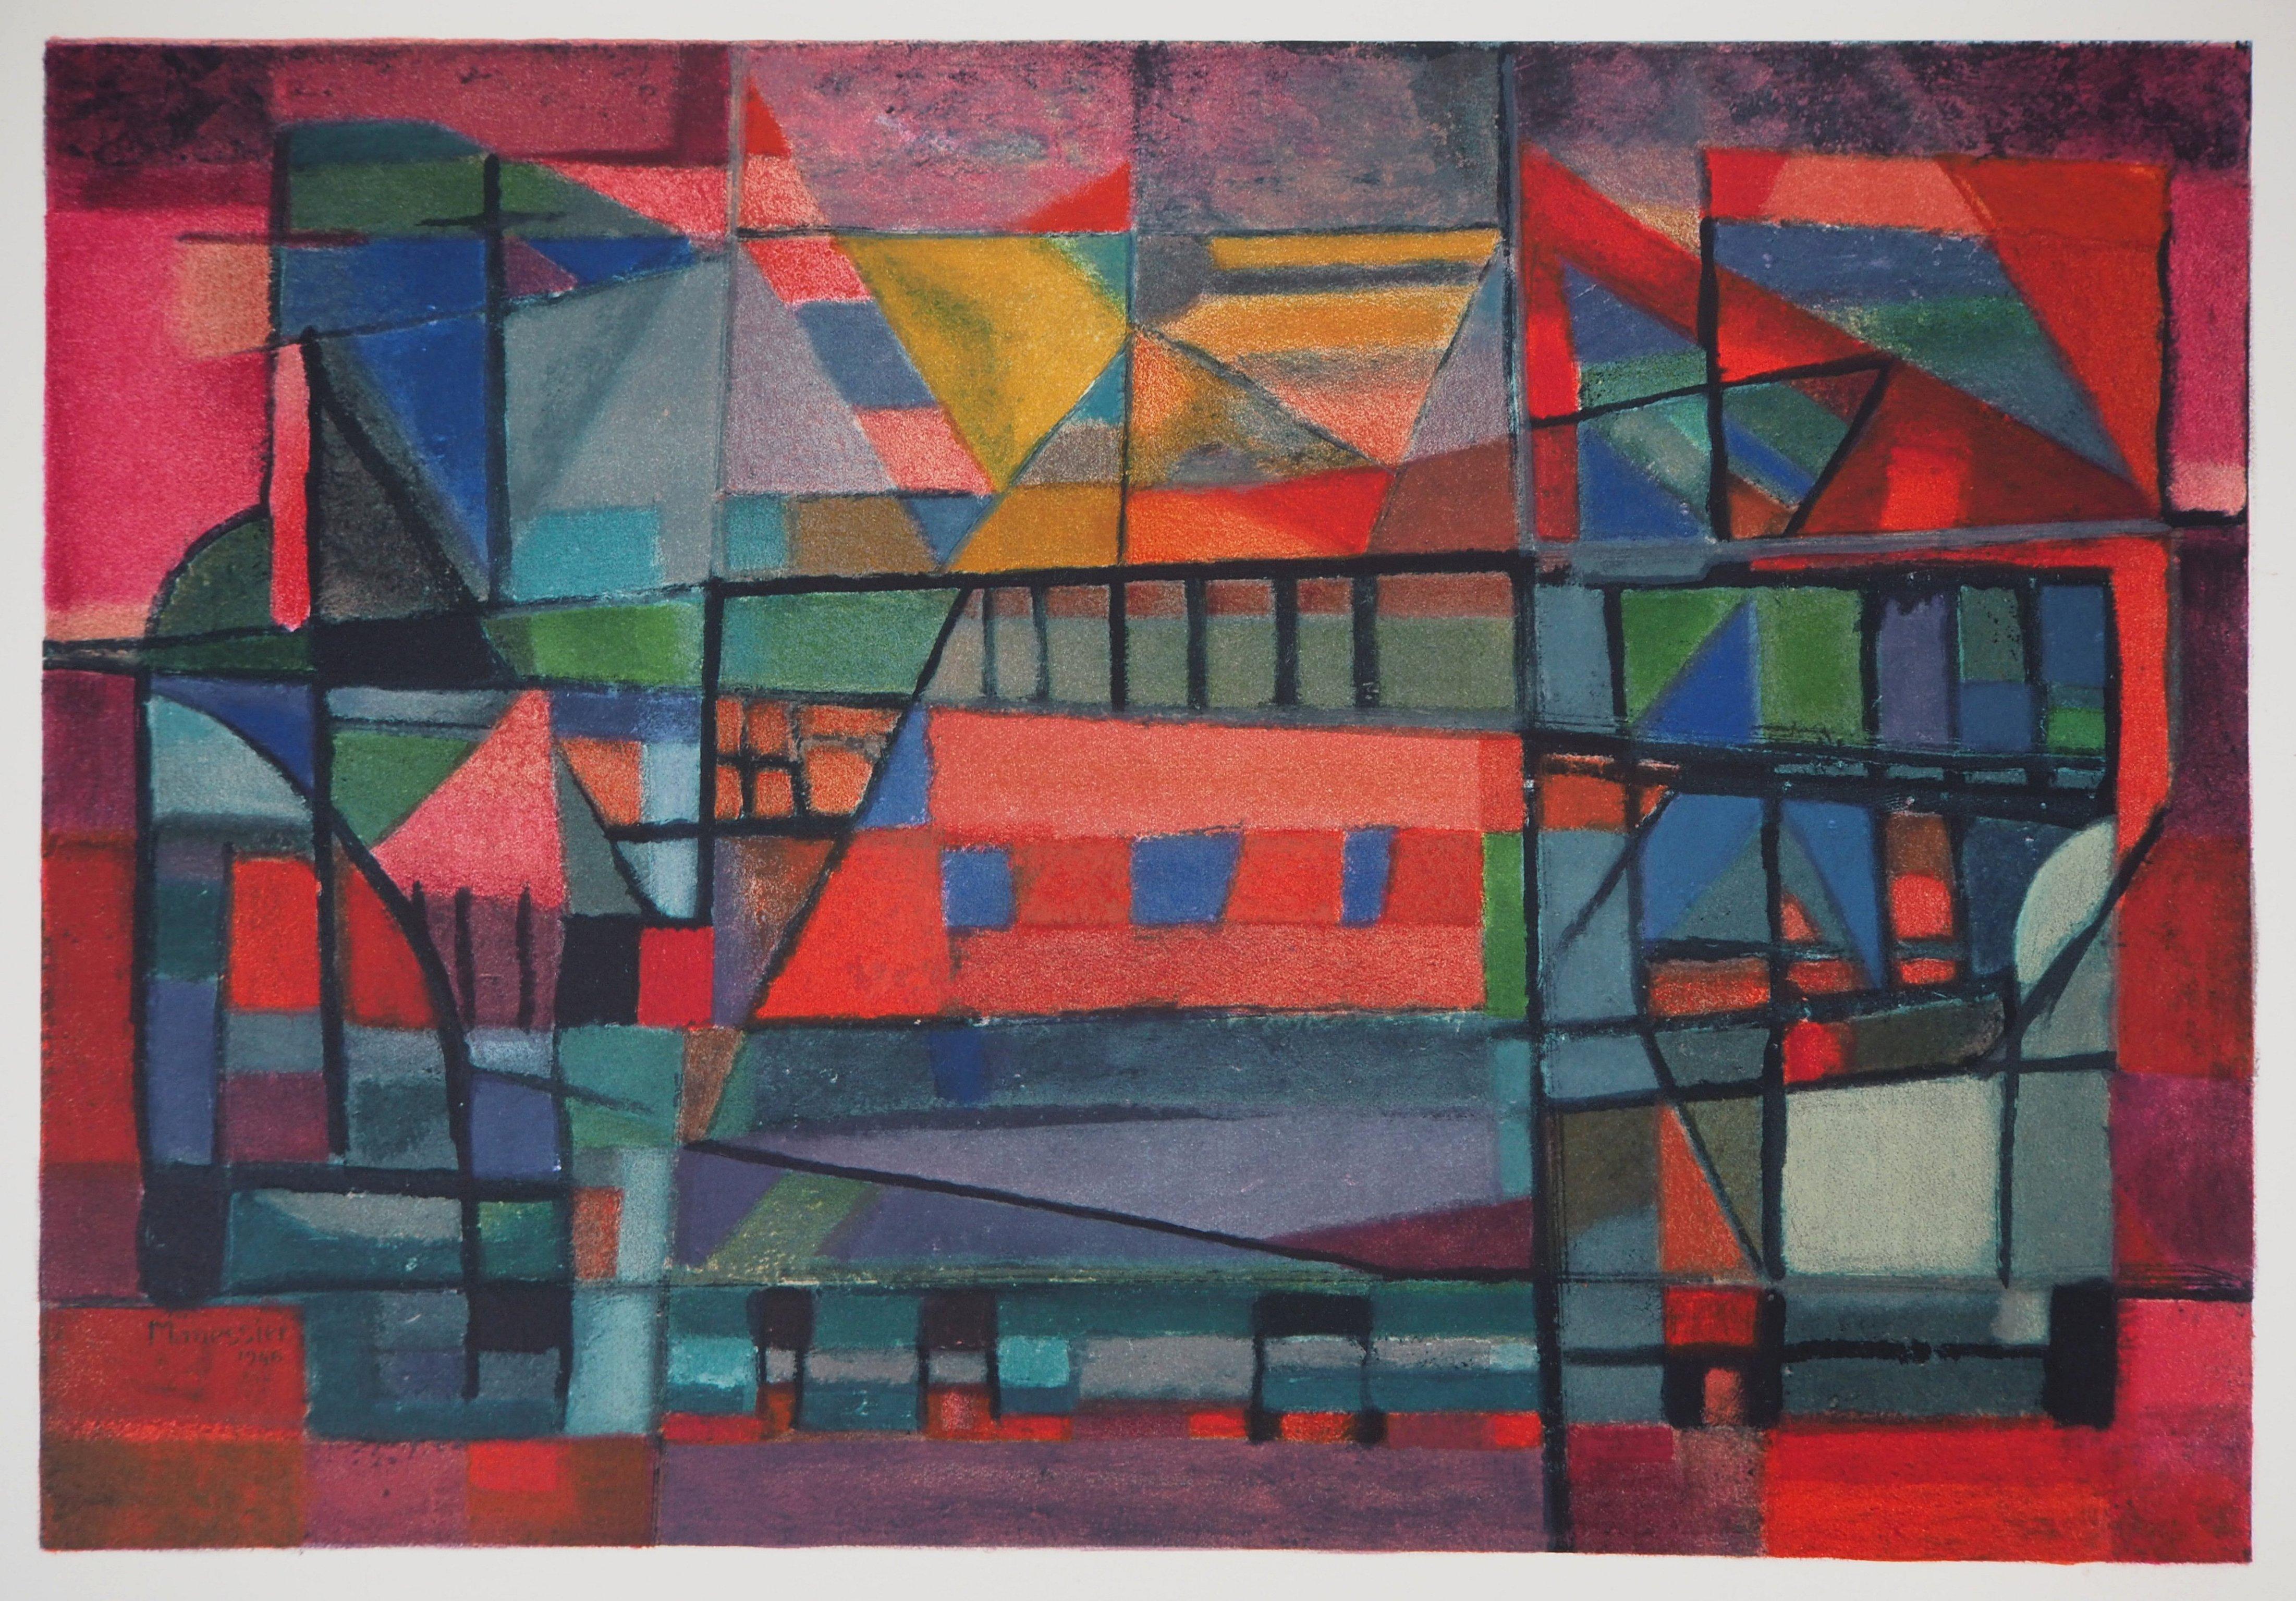 Construction of the Bridge in Red - Lithograph, Mourlot - Abstract Geometric Print by Alfred MANESSIER